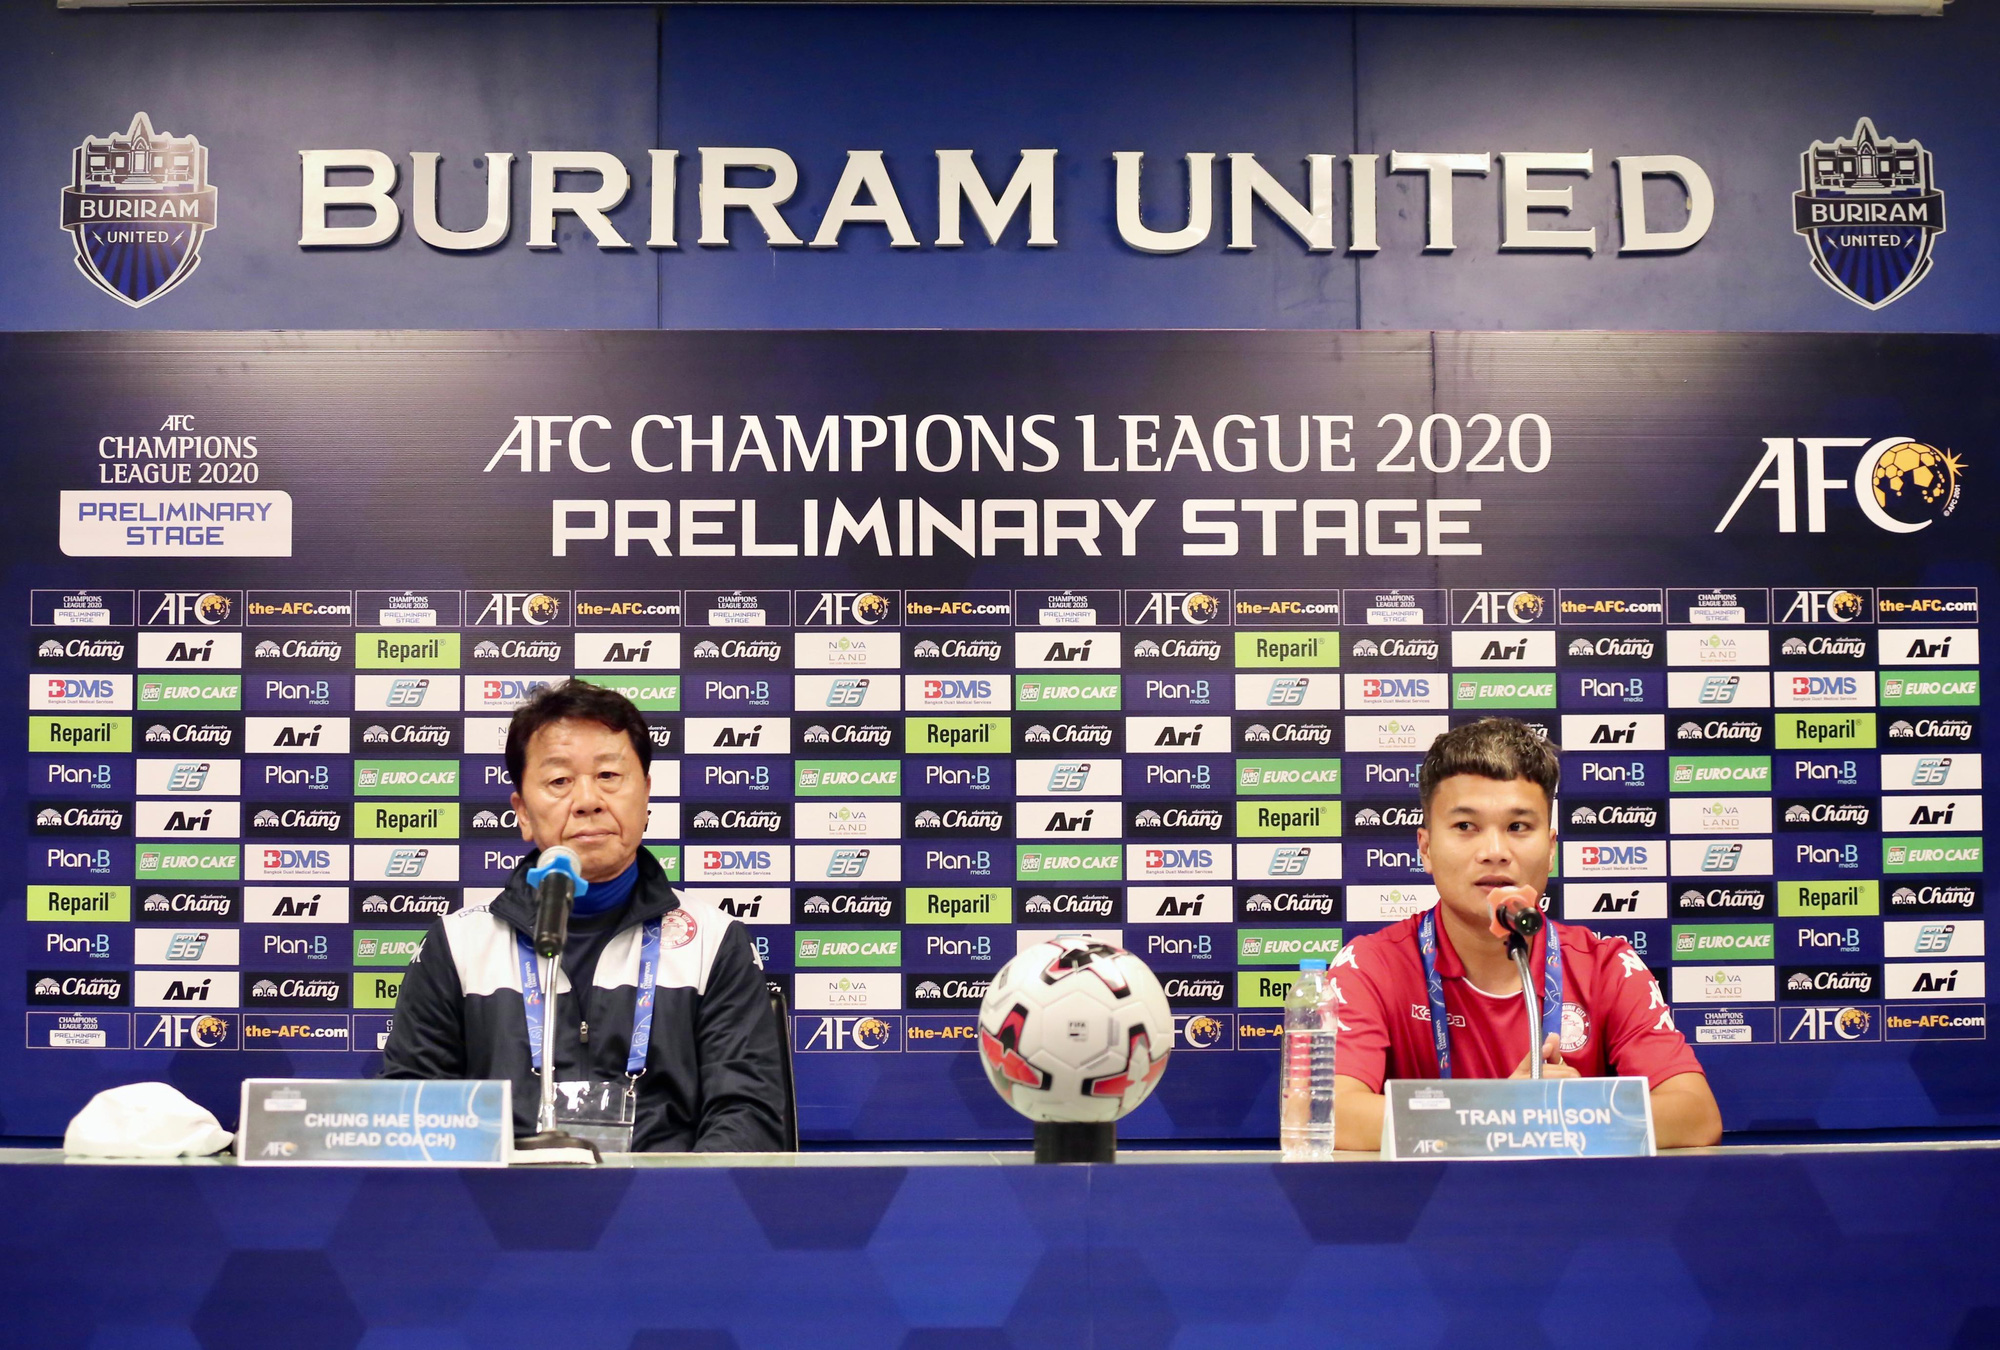 Ho Chi Minh City FC manager Chung Hae Soung (L) and midfielder Tran Phi Son at a prematch press conference ahead of the 2020 AFC Champions League preliminary round opener against hosts Buriram United in Thailand on January 20, 2020. Photo: Bao Toan / Tuoi Tre